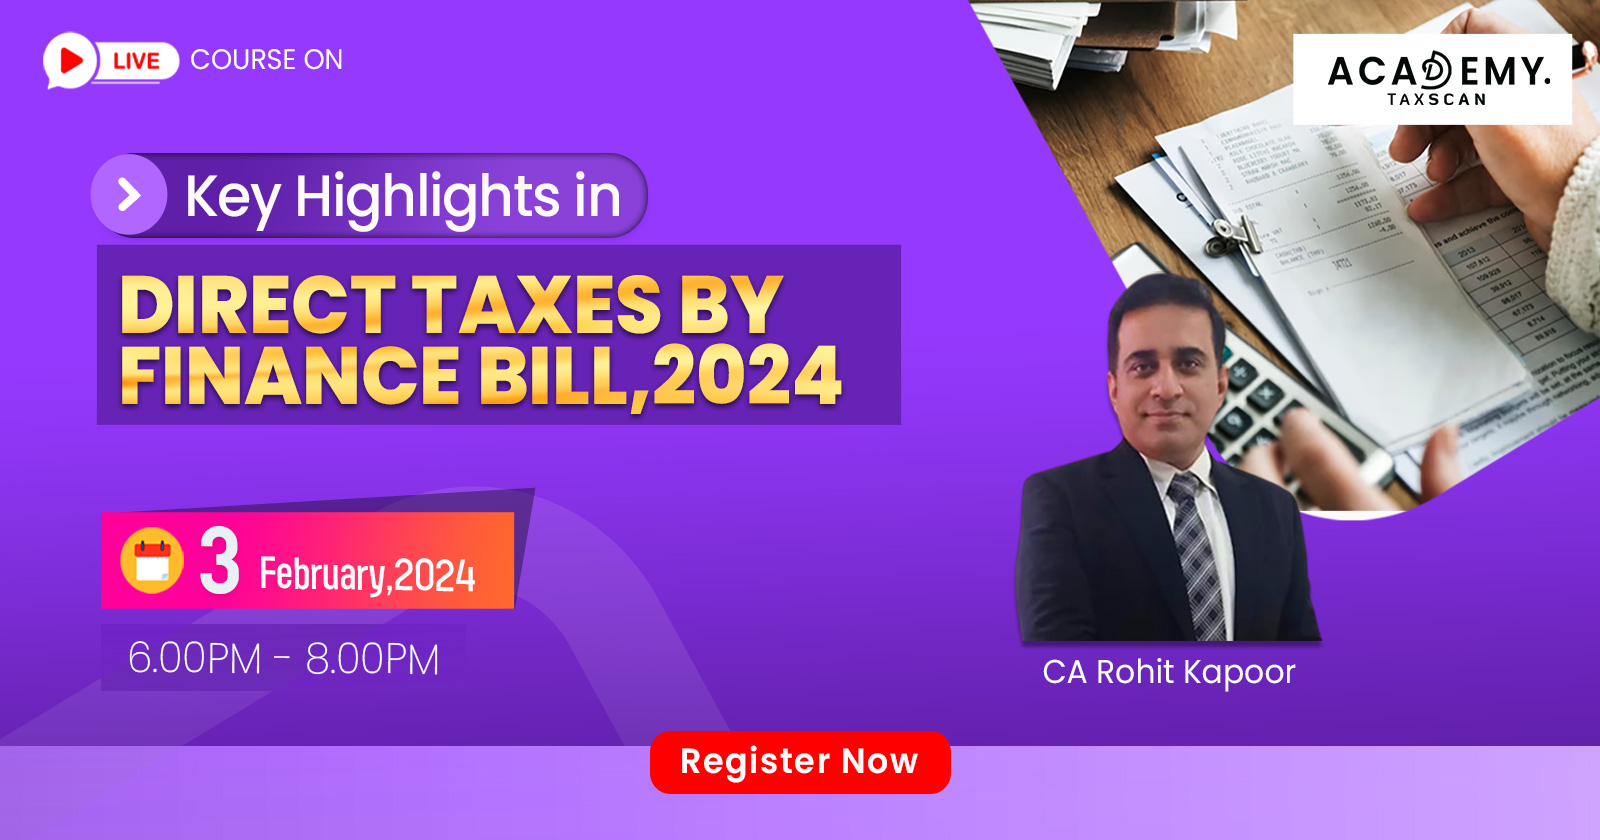 Live Course - Live Online Course - Key Highlights - Key Highlights in direct taxes - direct taxes - Finance Bill 2024 - Finance Bill - Tax - Finance - Budget - Taxscan Academy